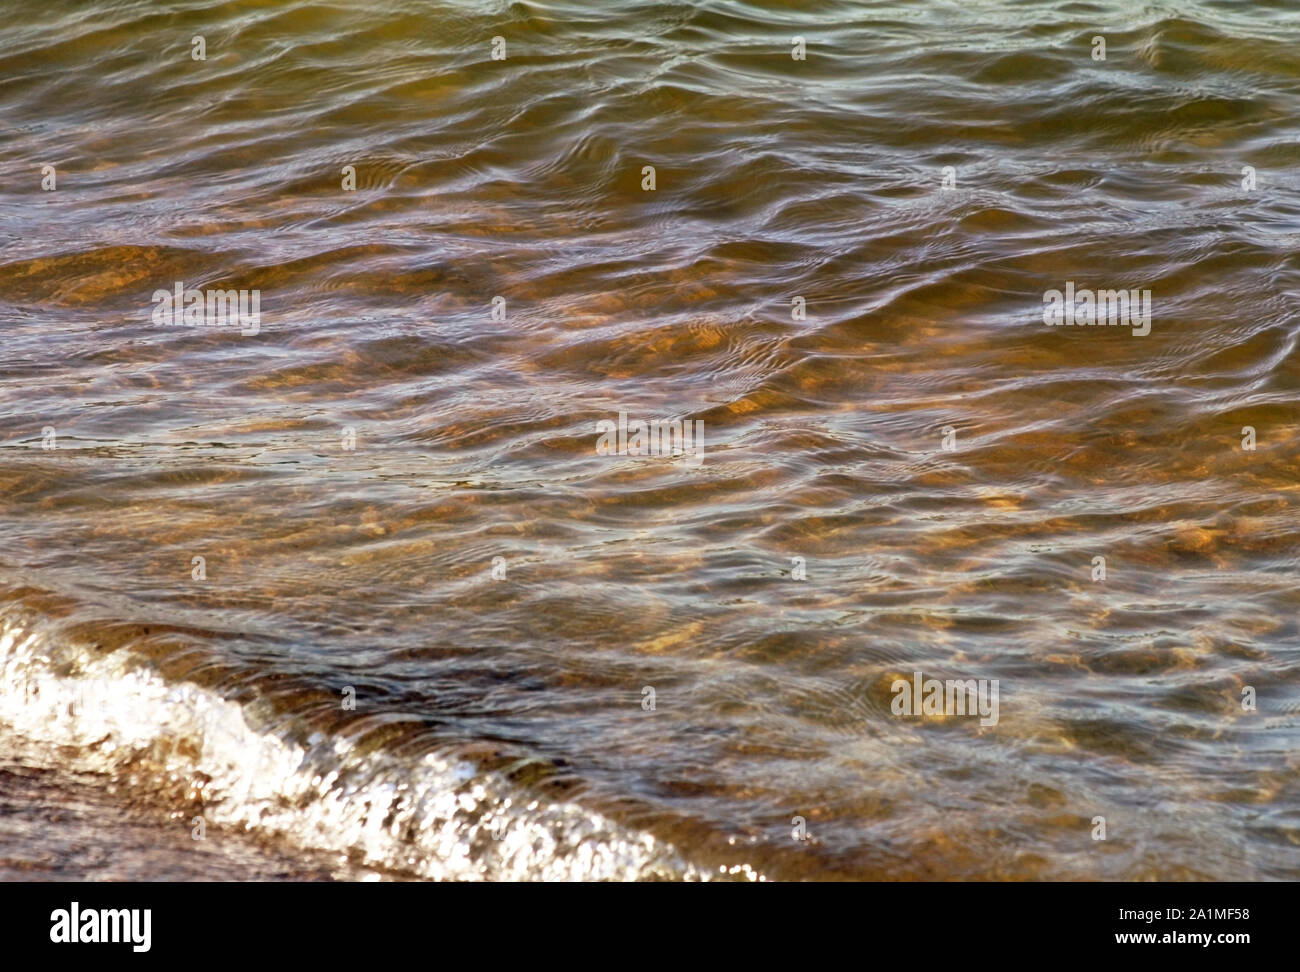 Beautiful lake waters in colors of green, brown and gold with soft ripples on surface Stock Photo